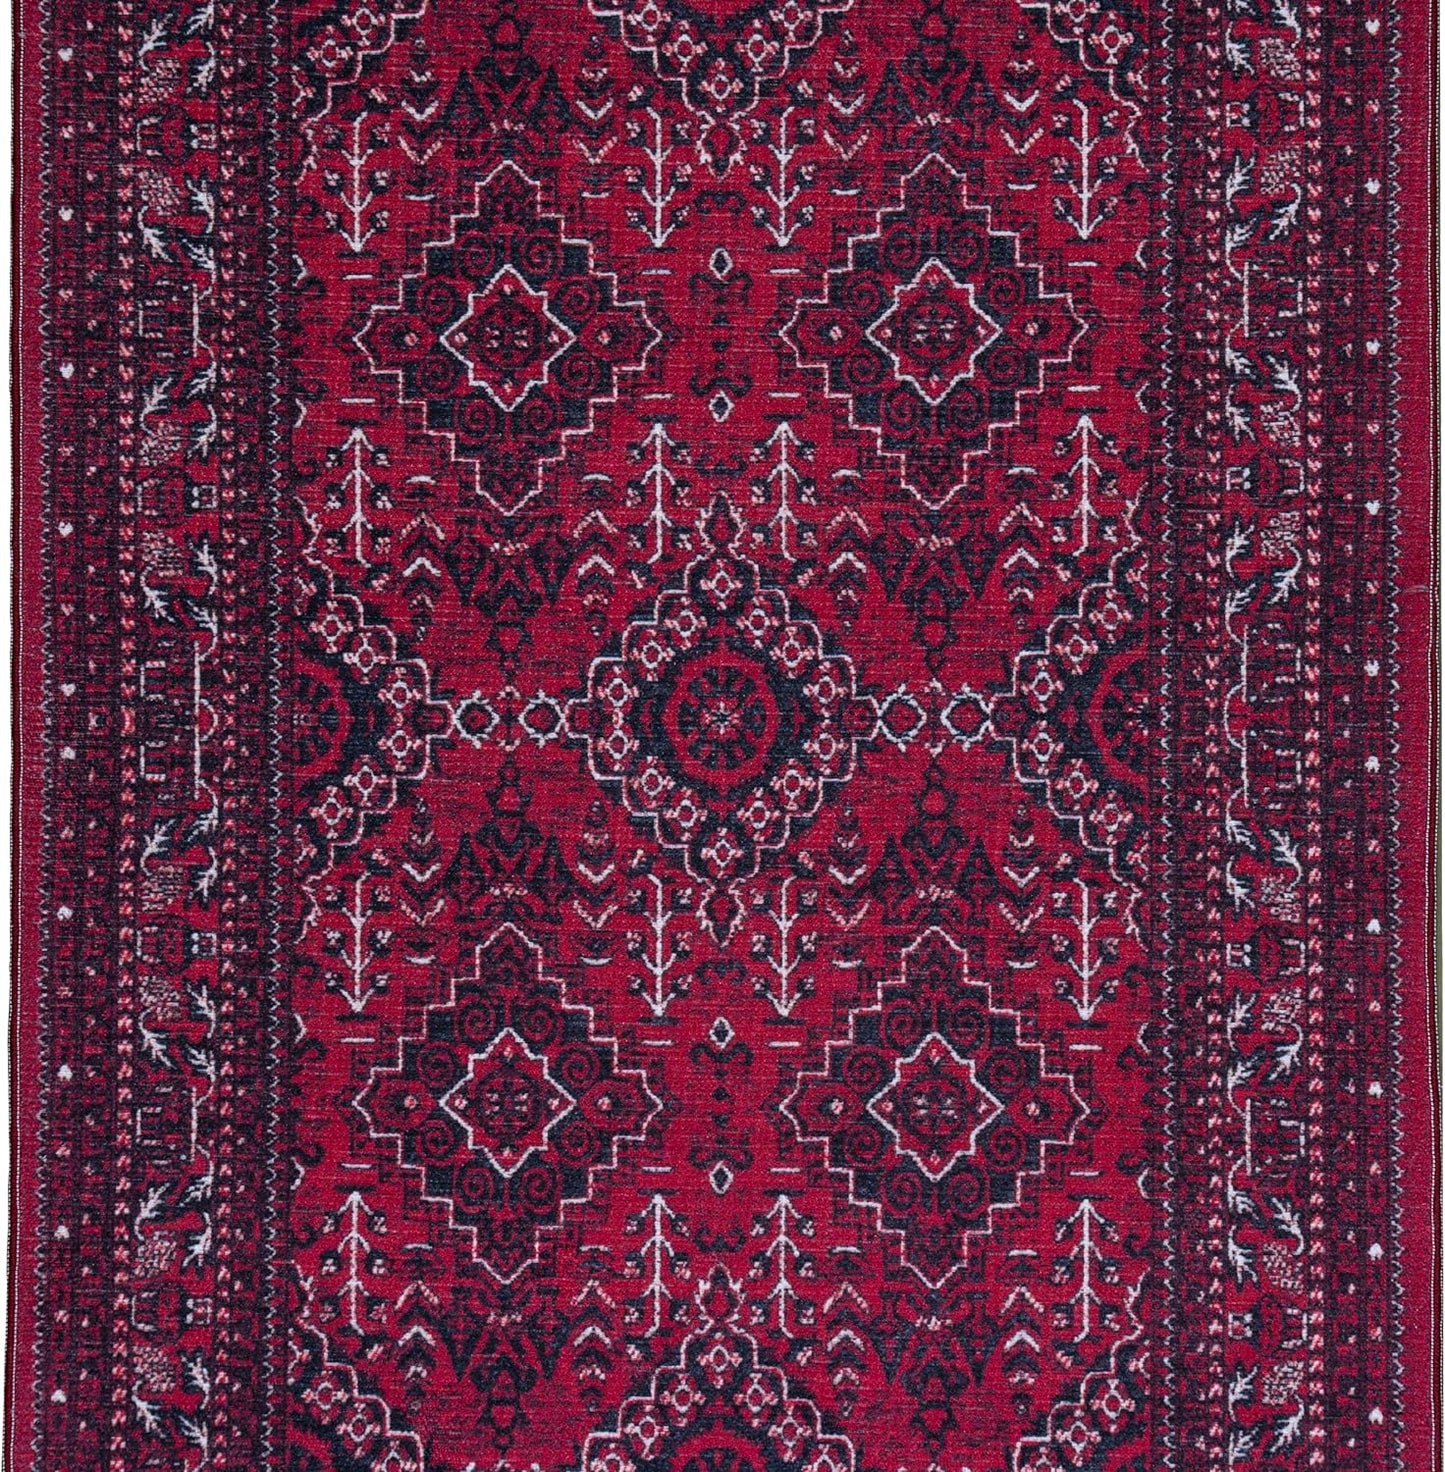 Playa Rug Machine Washable Area Rug With Non Slip Backing - Stain Resistant - Eco Friendly - Family and Pet Friendly - Denali Turkoman Bokhara Oriental Burgundy Design